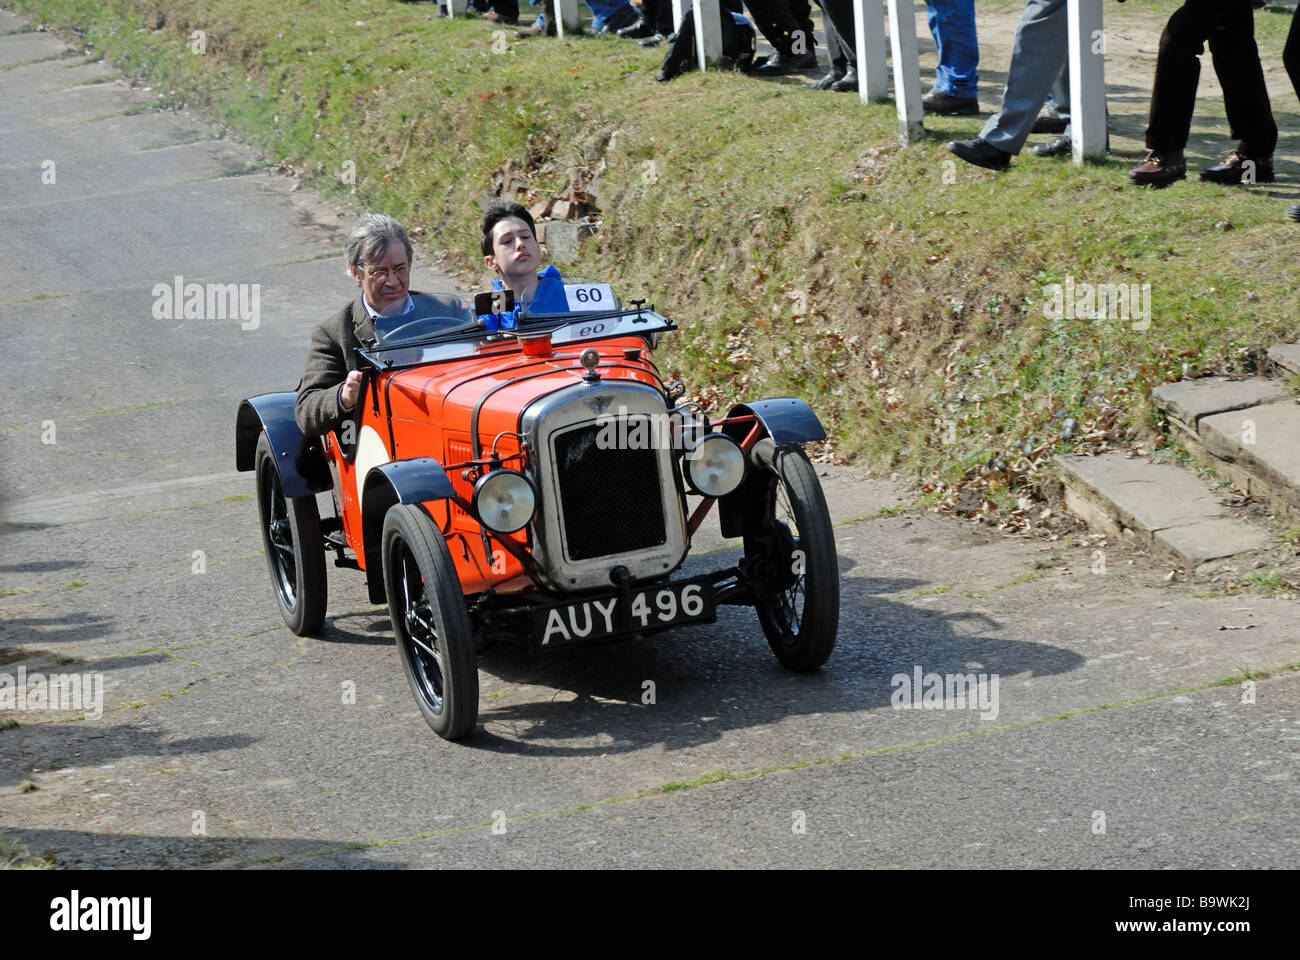 AUY 496 a 1931 Austin Ulster ex works TT David Howe ascending at speed on the Brooklands Museum Test Hill Challenge celebrating Stock Photo